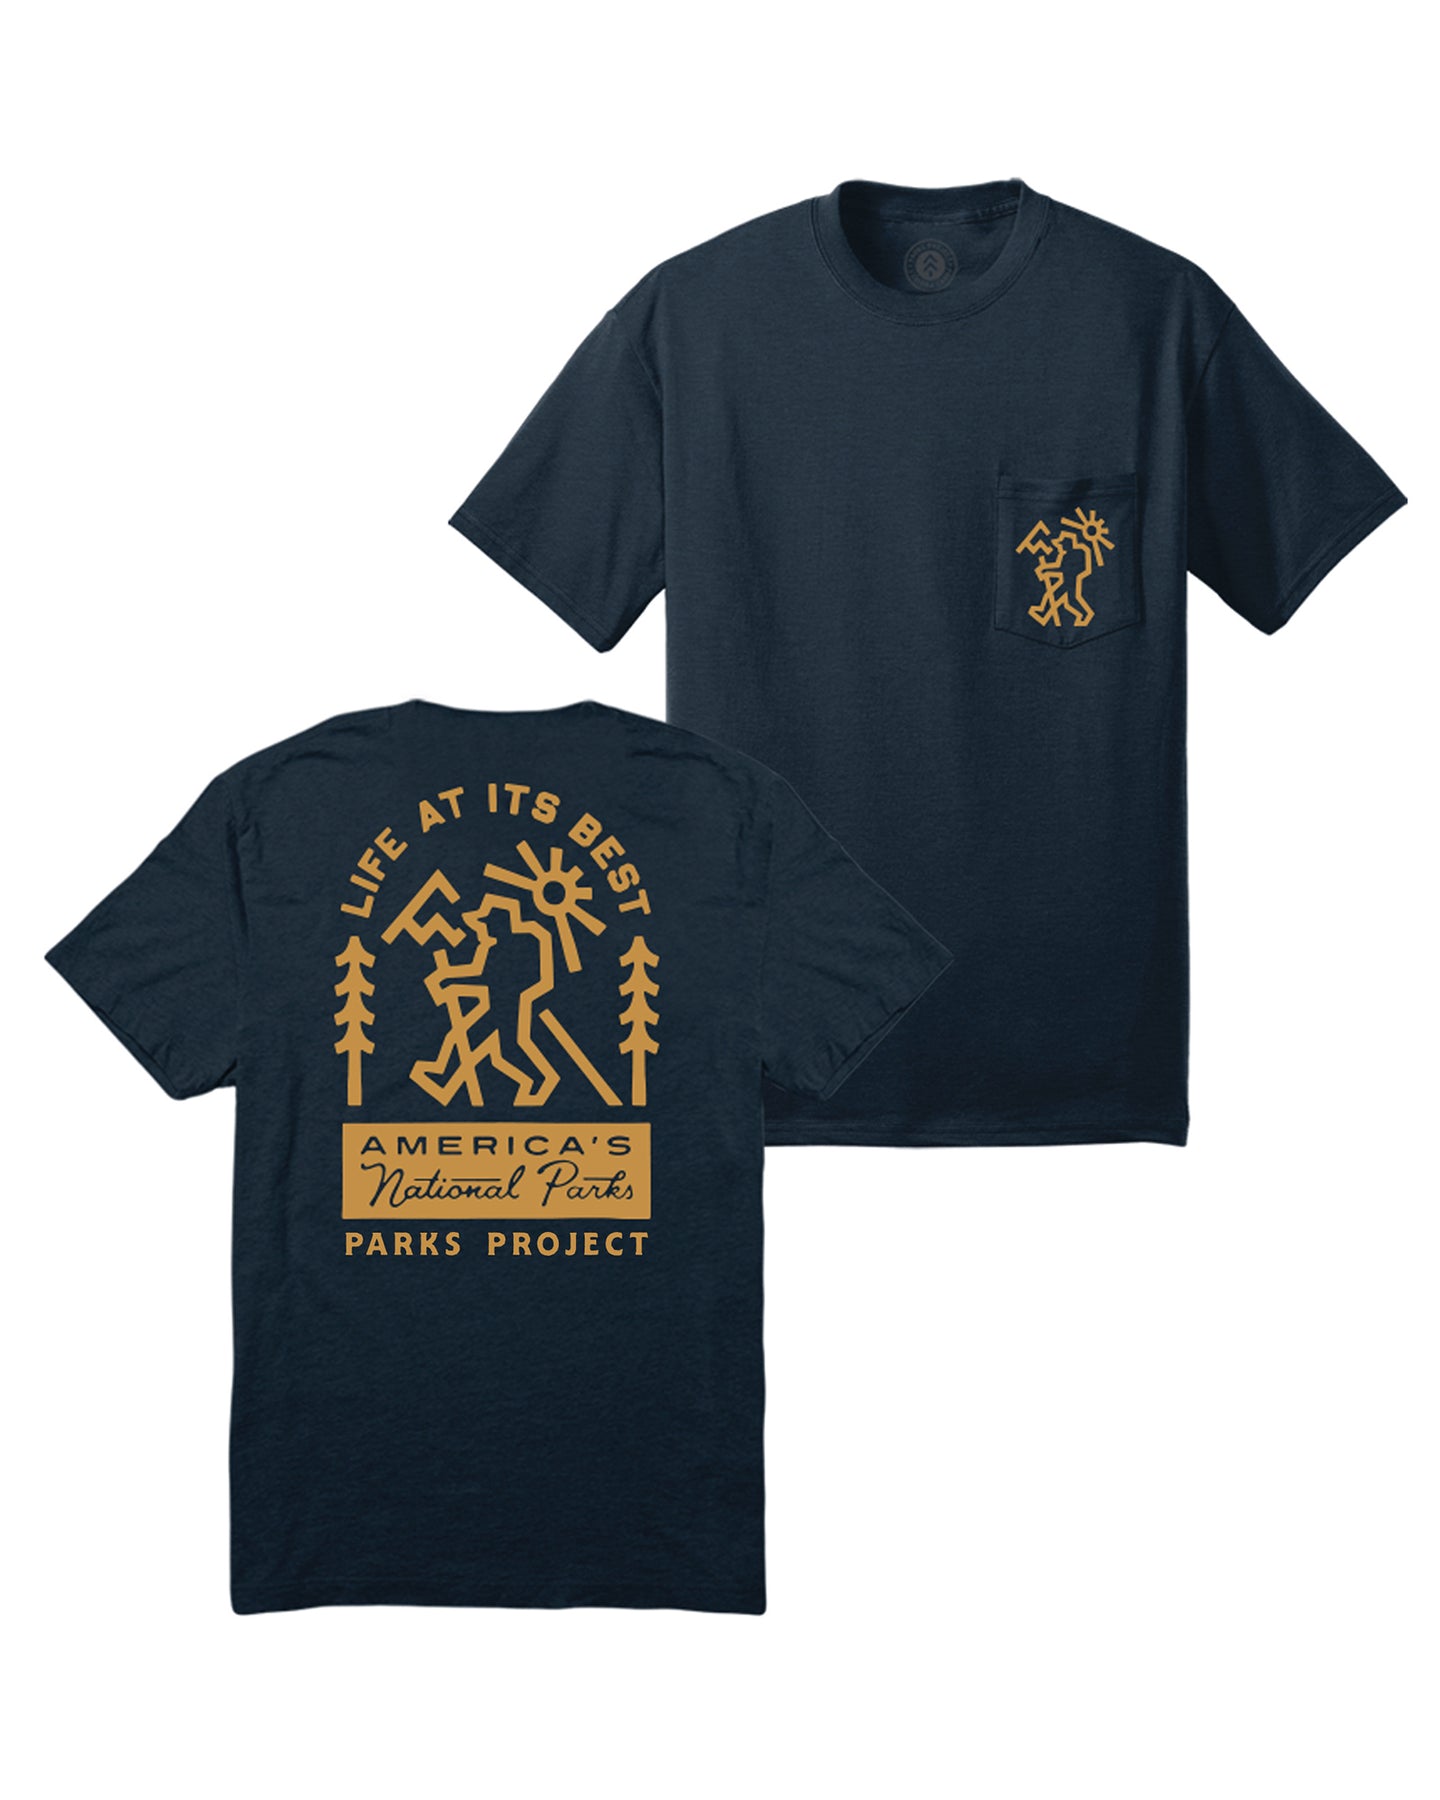 PARKS PROJECT Life At Its Best Pocket Tee SP20-2